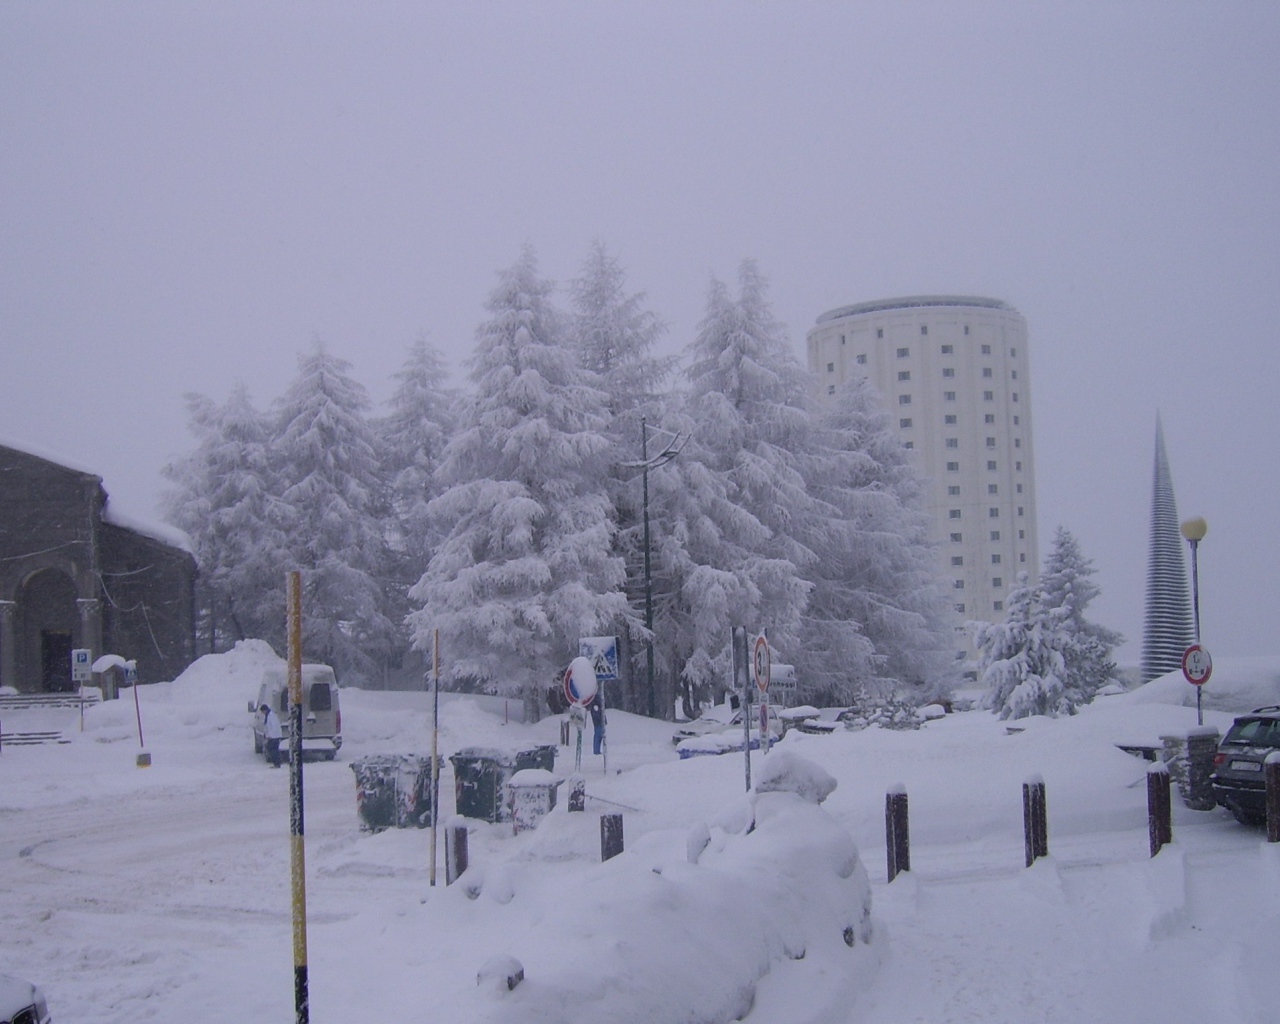 Snowfall at the ski resort of Sestriere, Italy